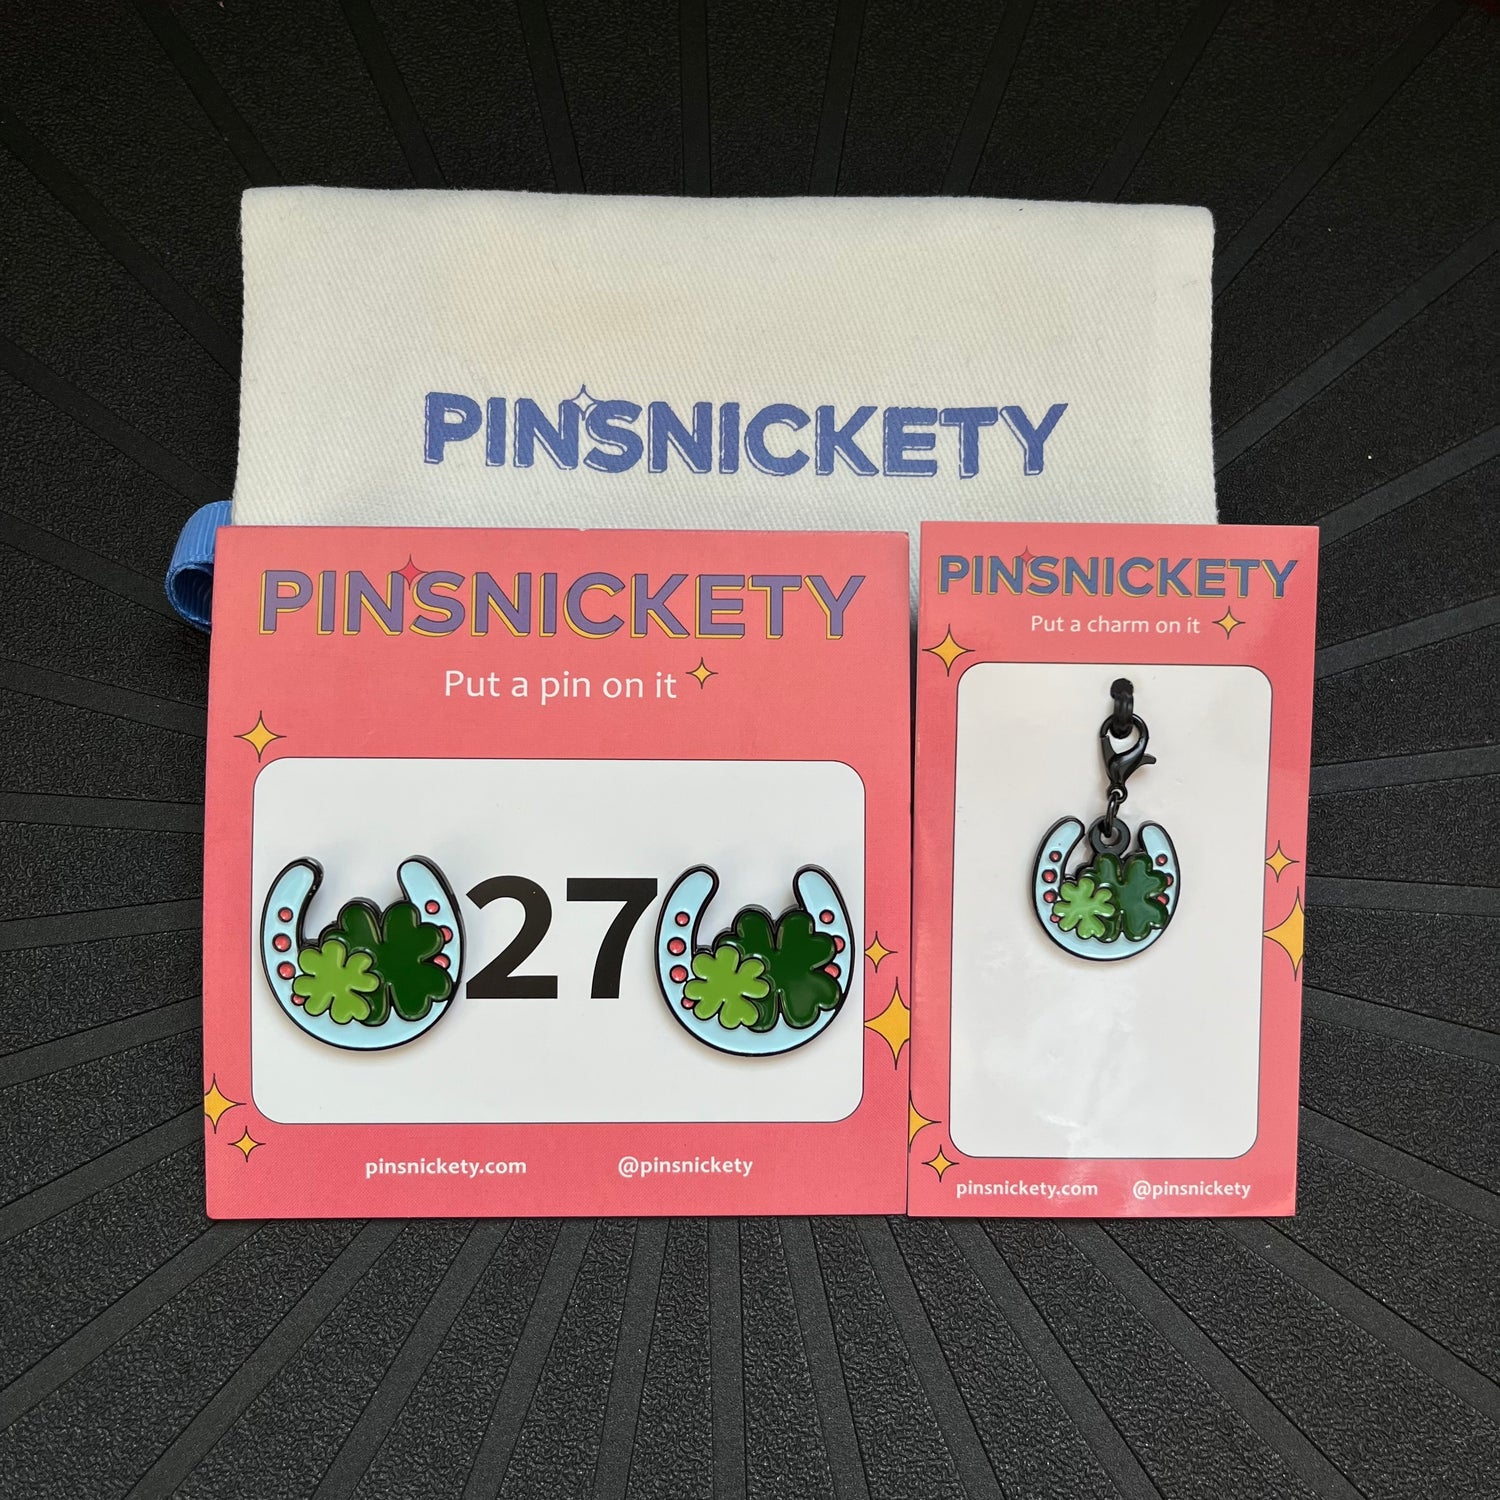 pinsnickety horse shoe matching set, featuring horse show number pins, a braid and bridle charm, and a Pinsnickety twill storage bag